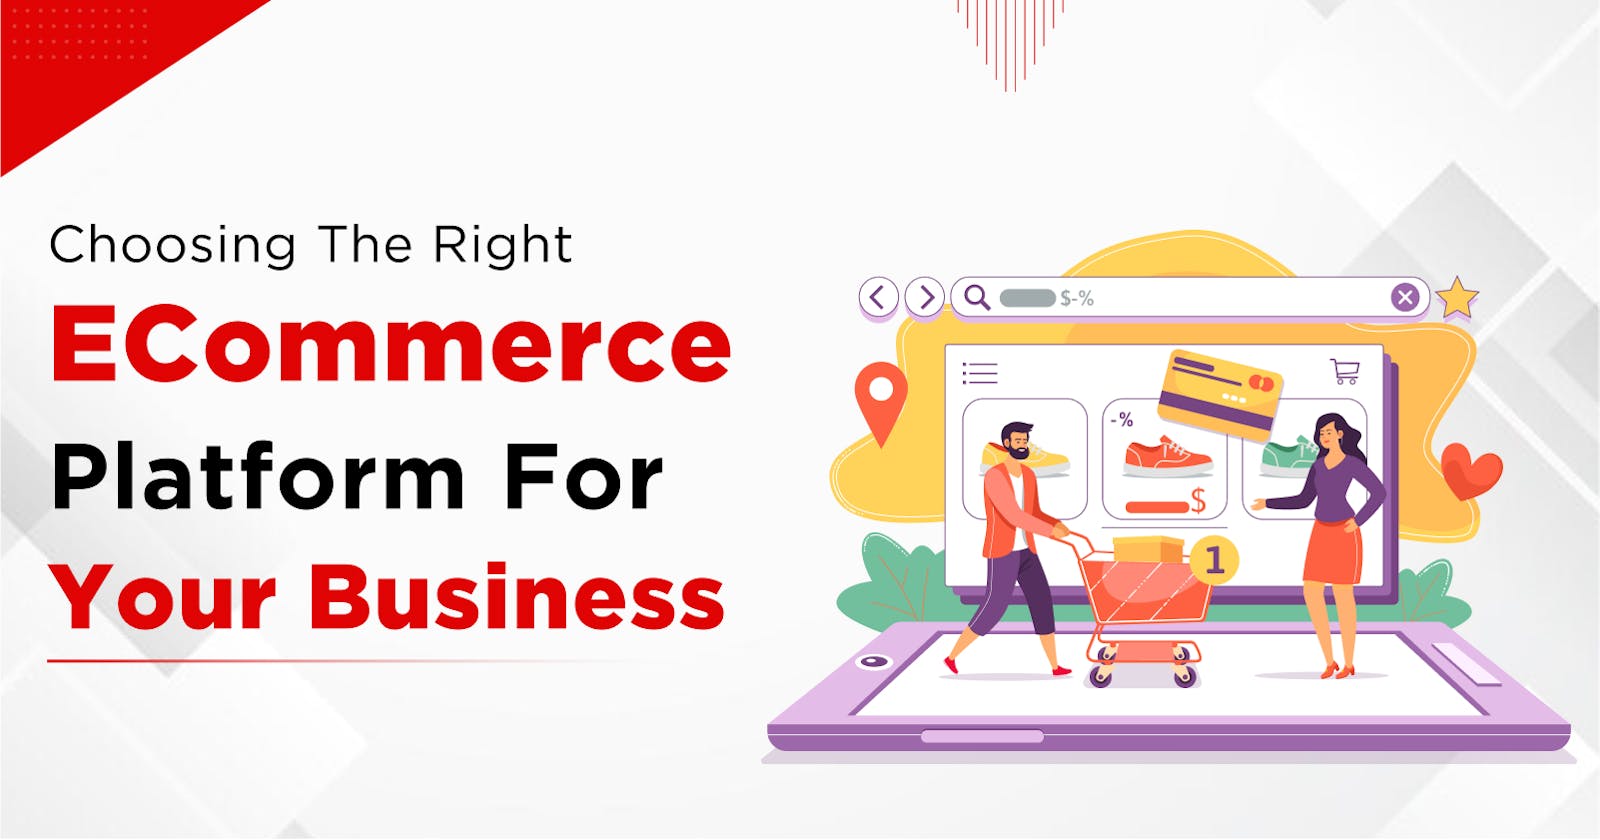 Choosing the Right eCommerce Platform for Your Business